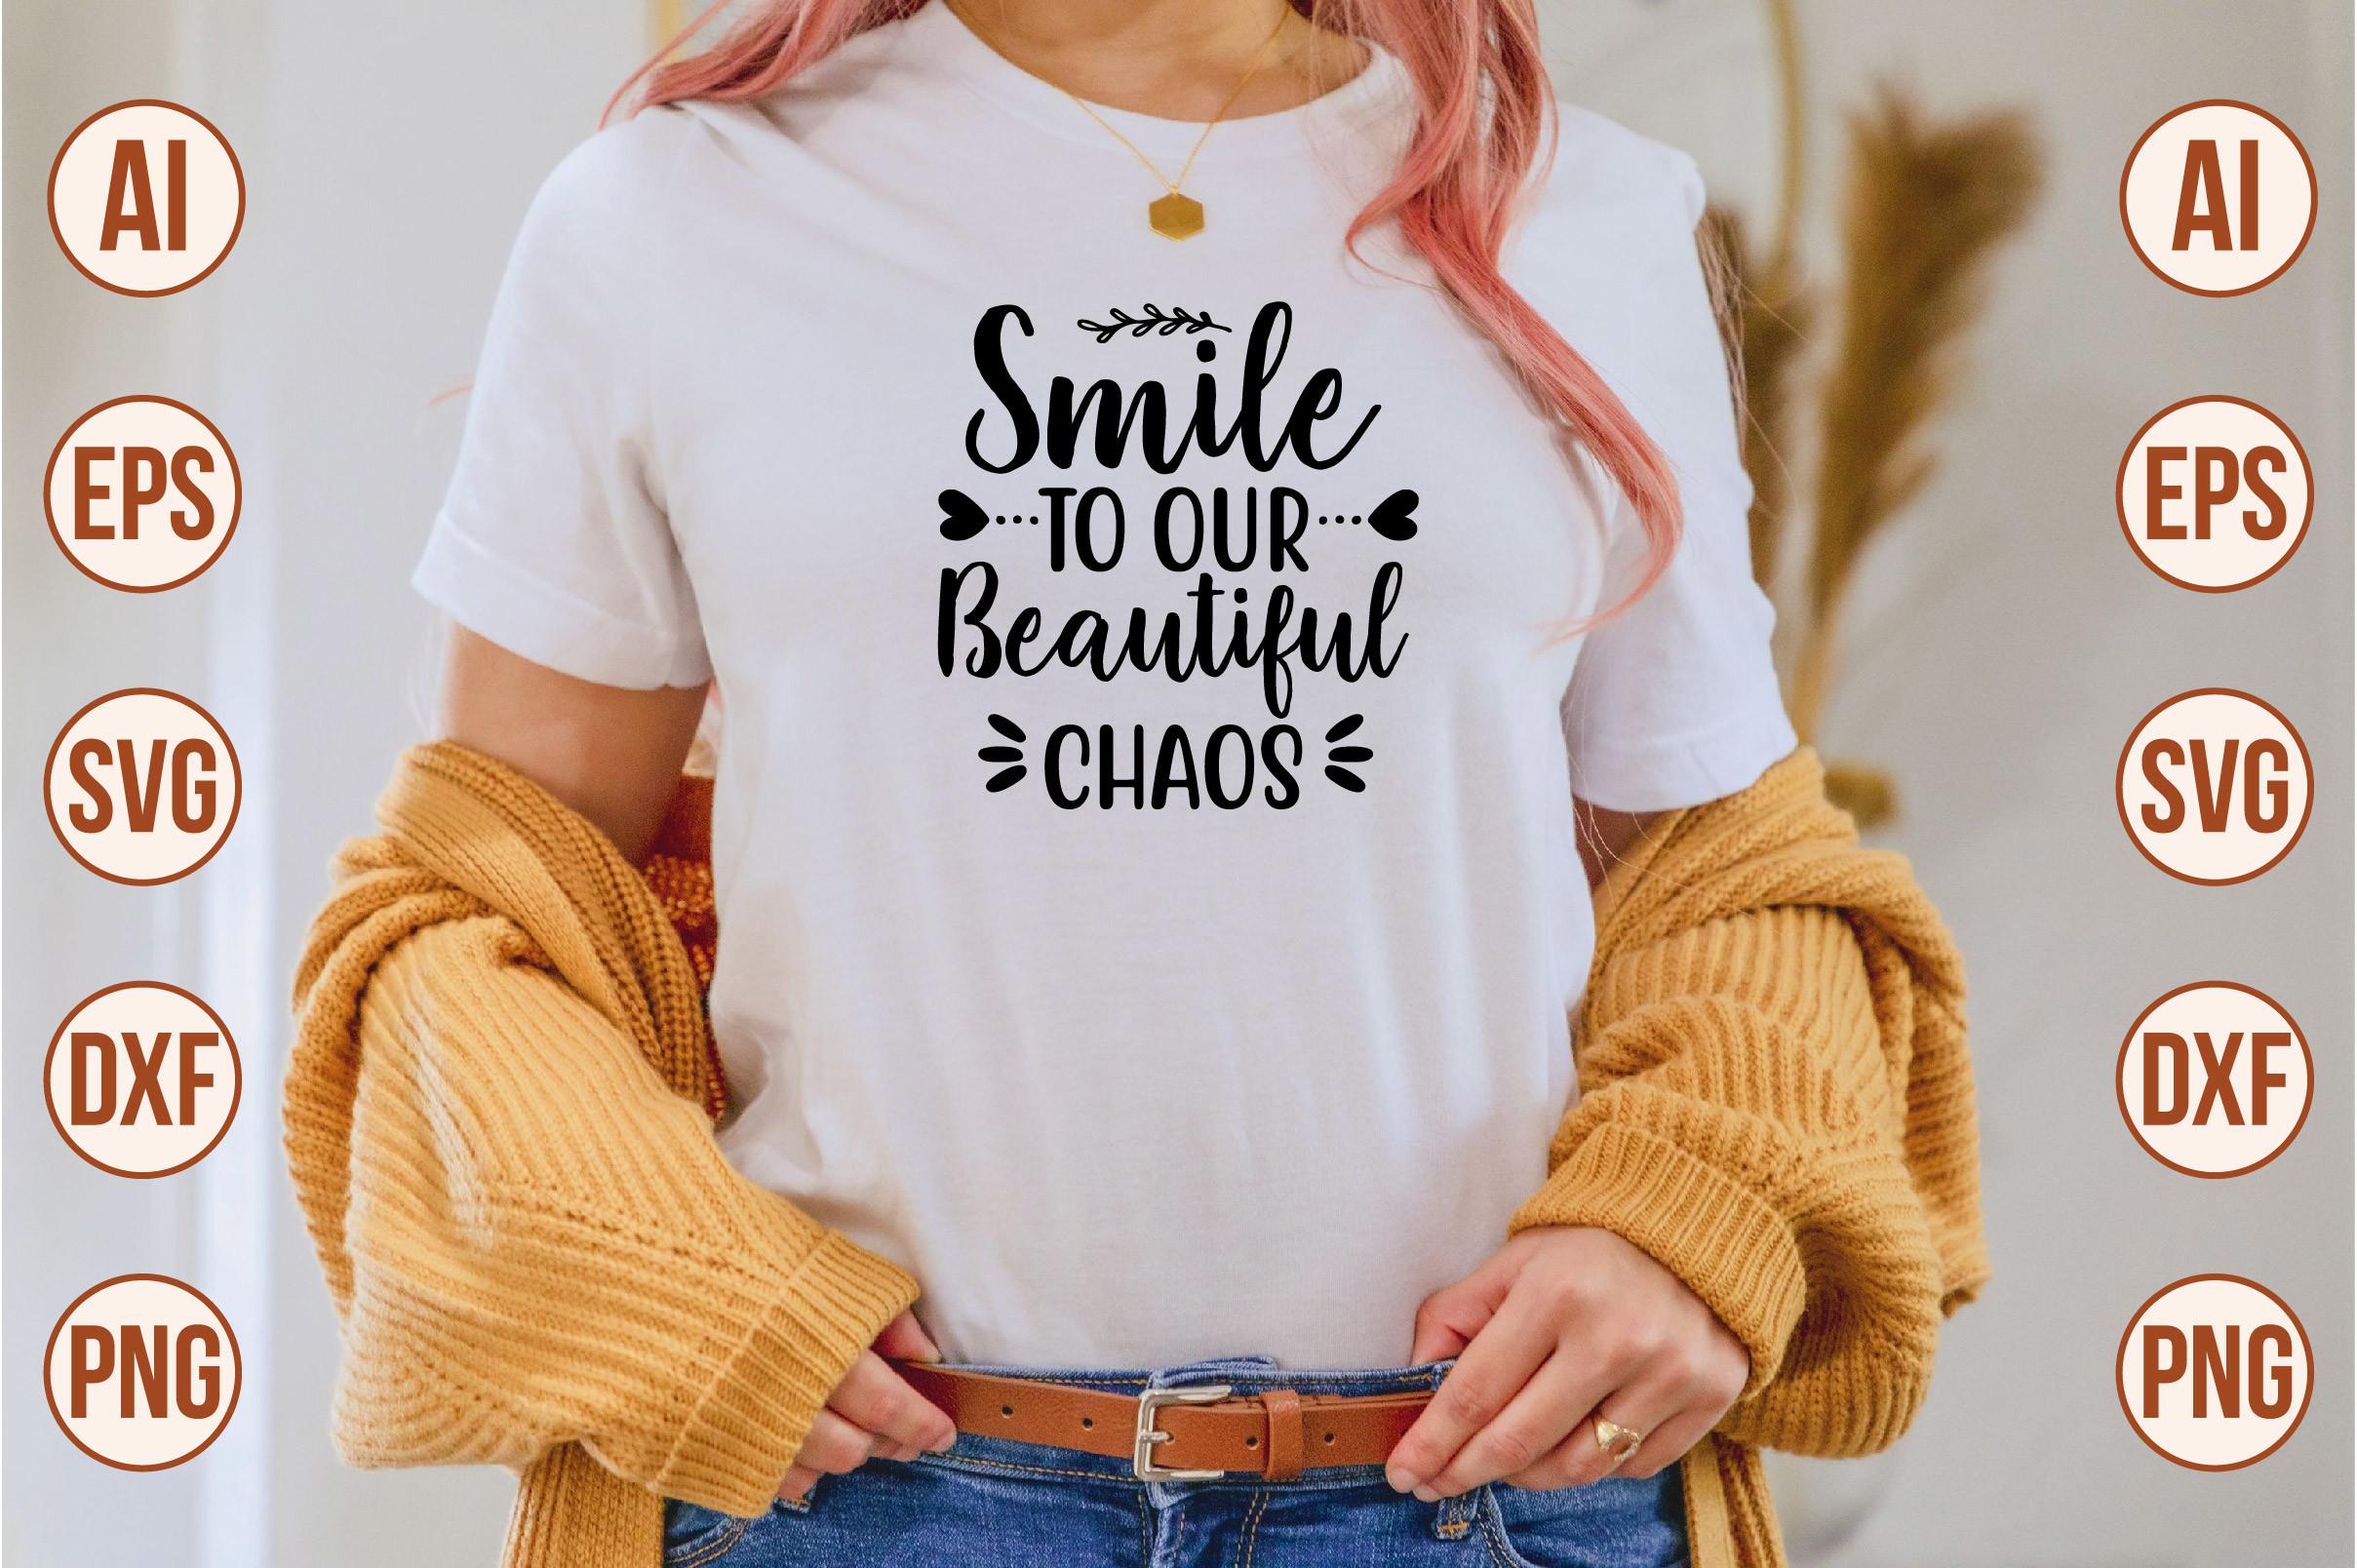 Smile to Our Beautiful Chaos 2